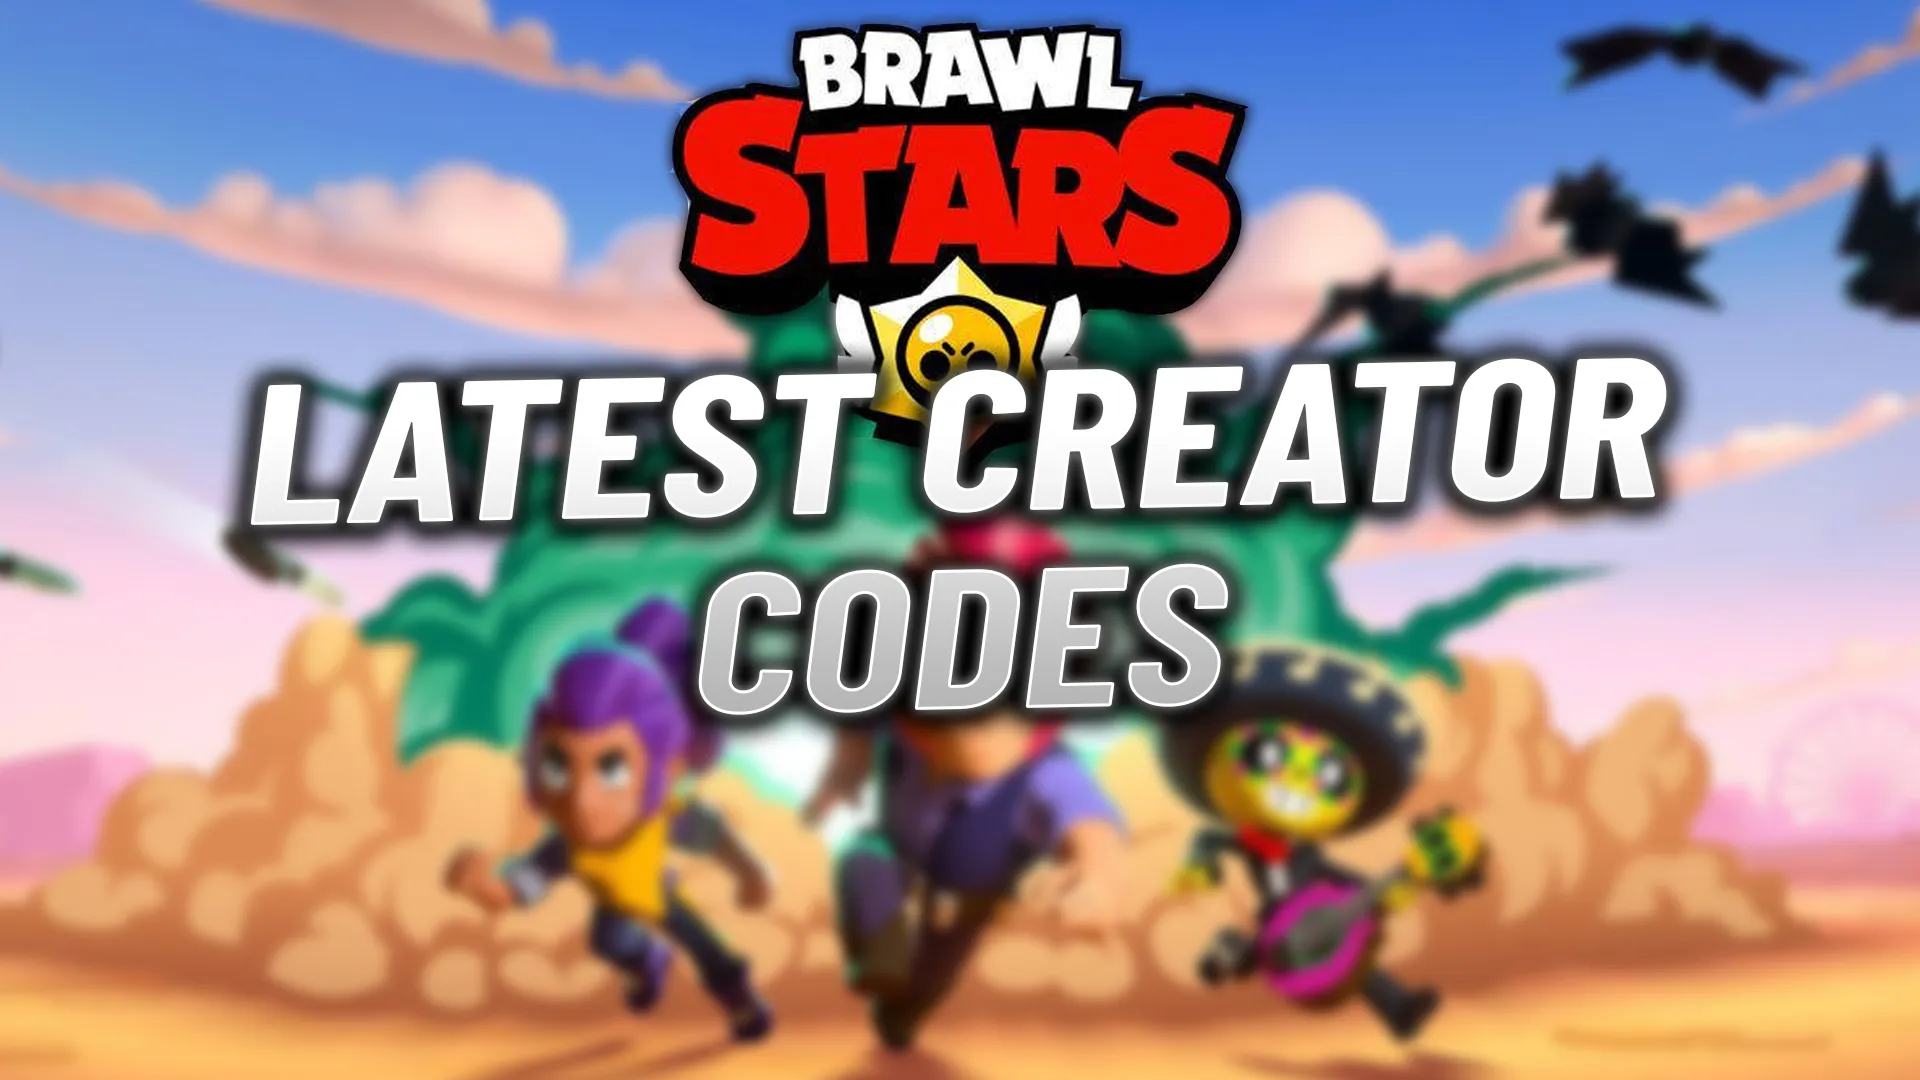 How to Make a Supercell Account on Brawl Stars - Playbite